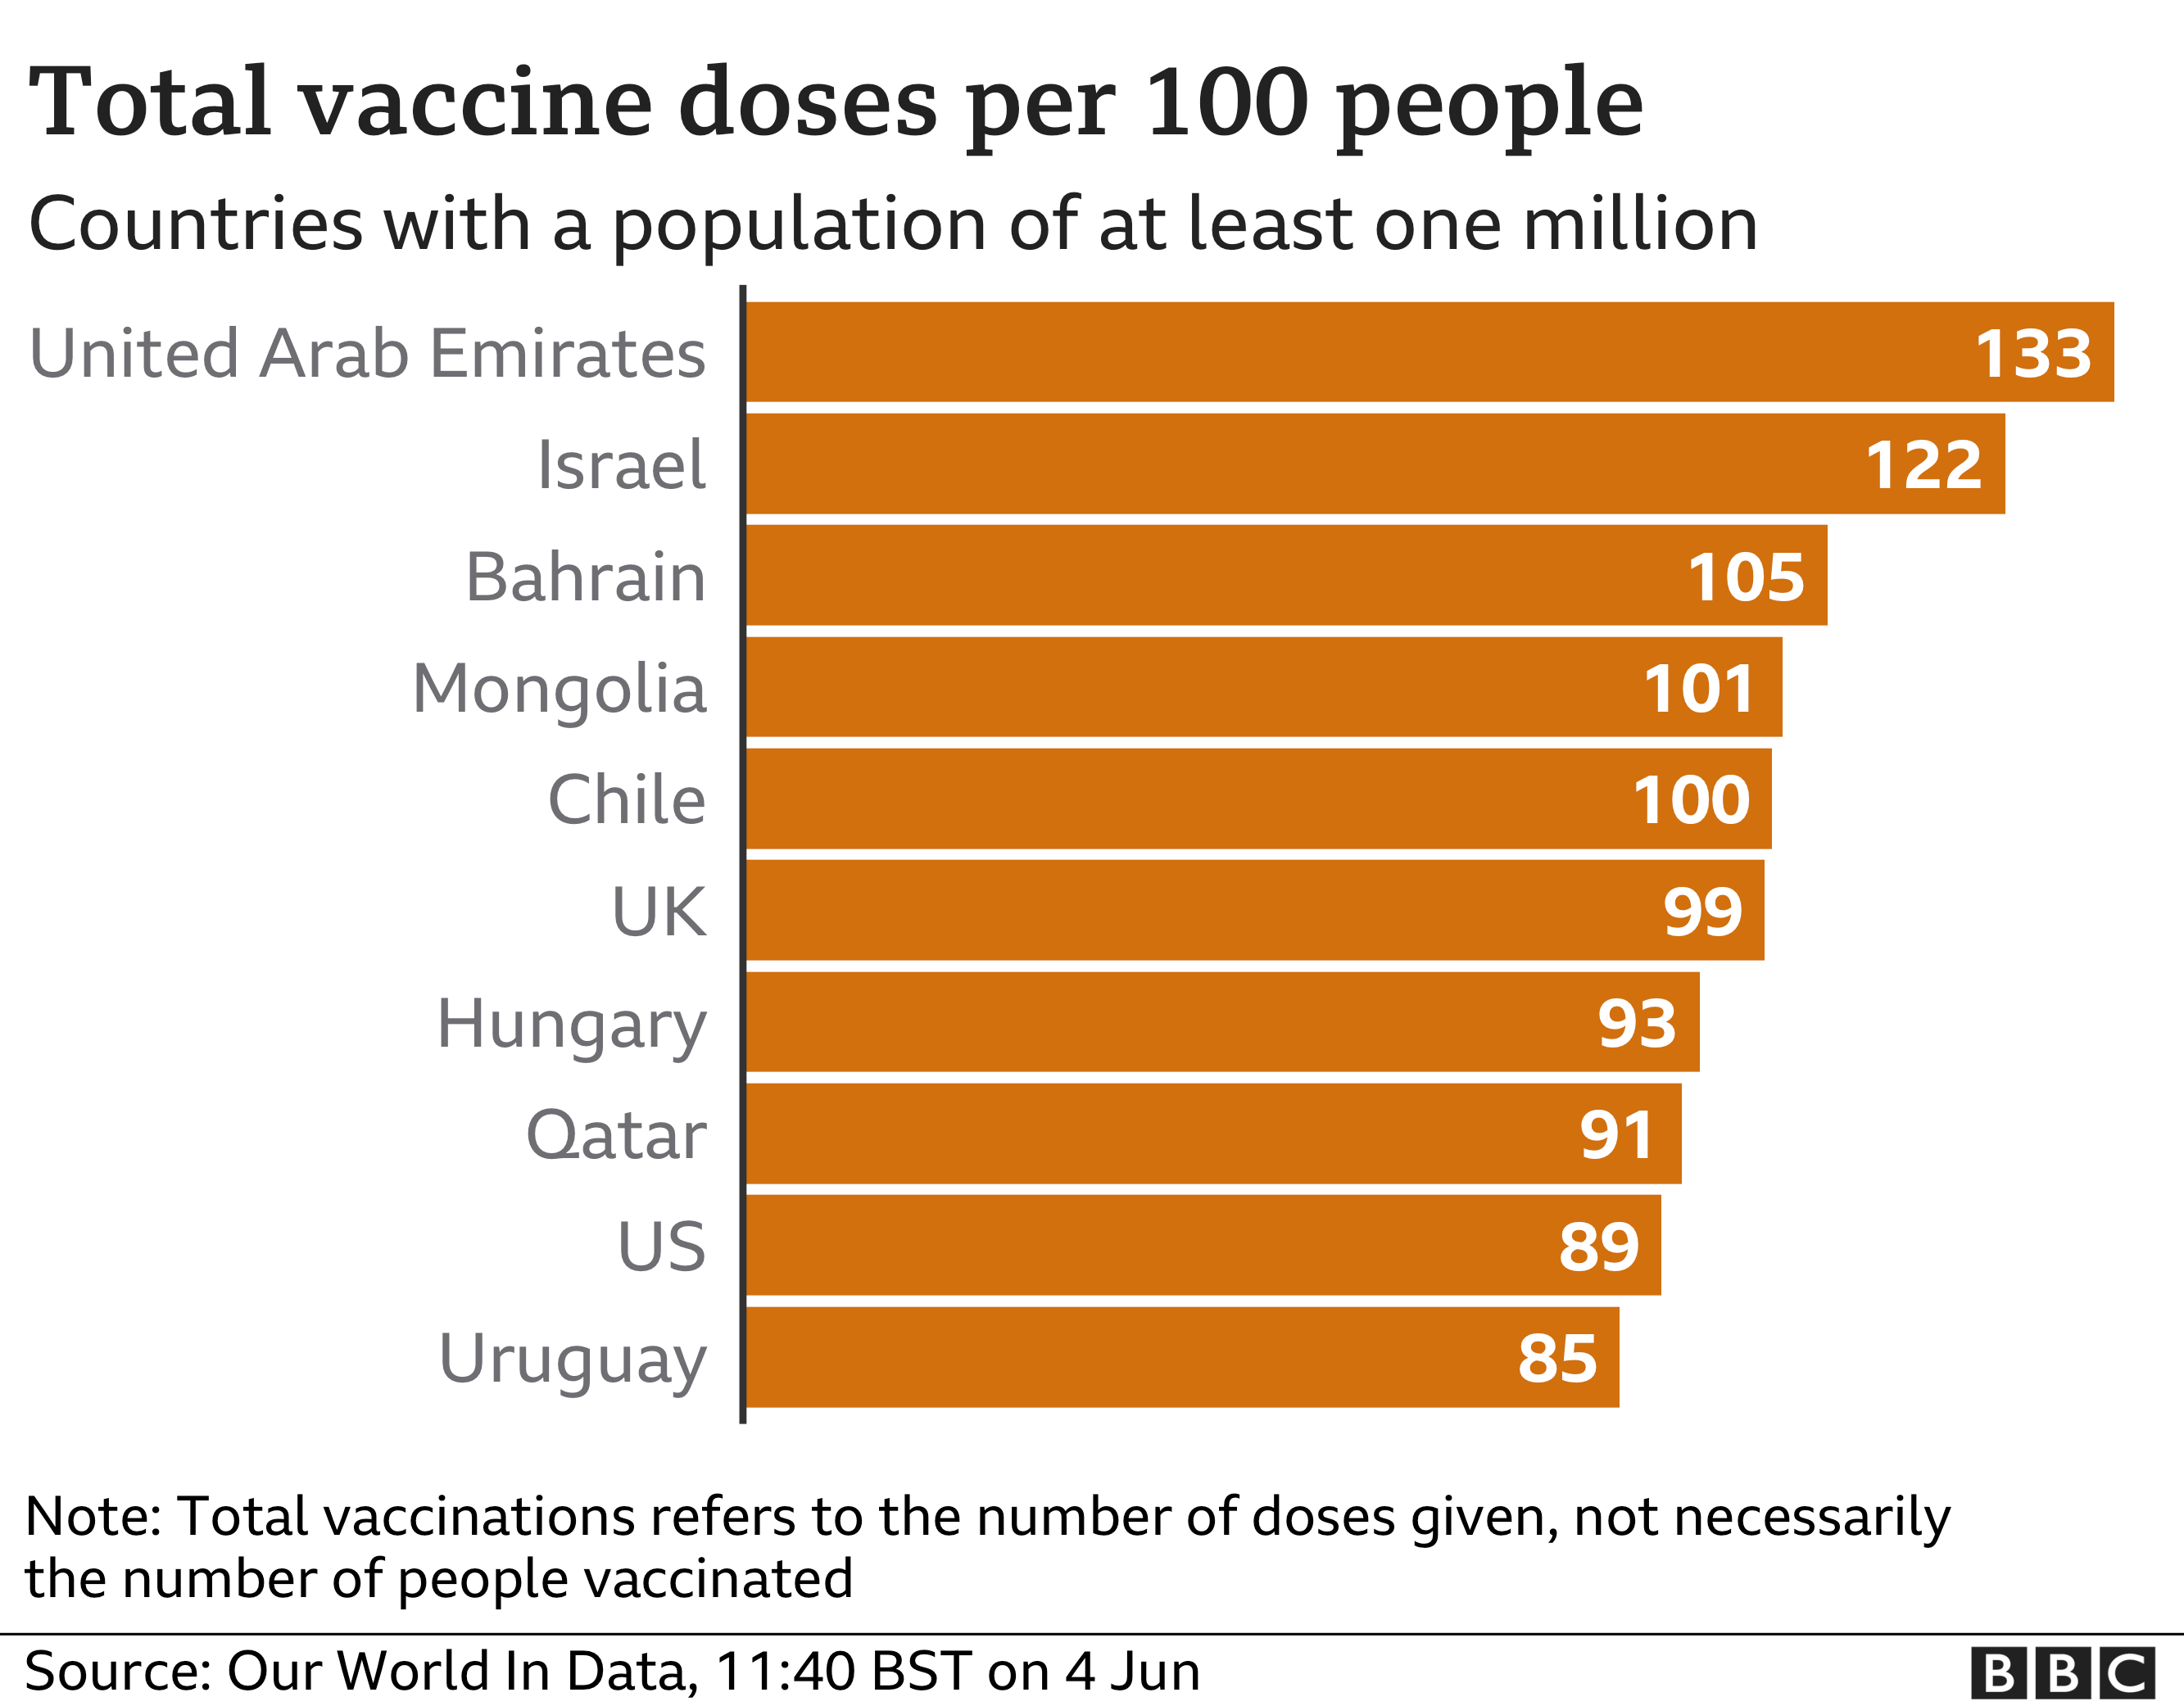 Chart showing the total number of vaccine doses per 100 people by country